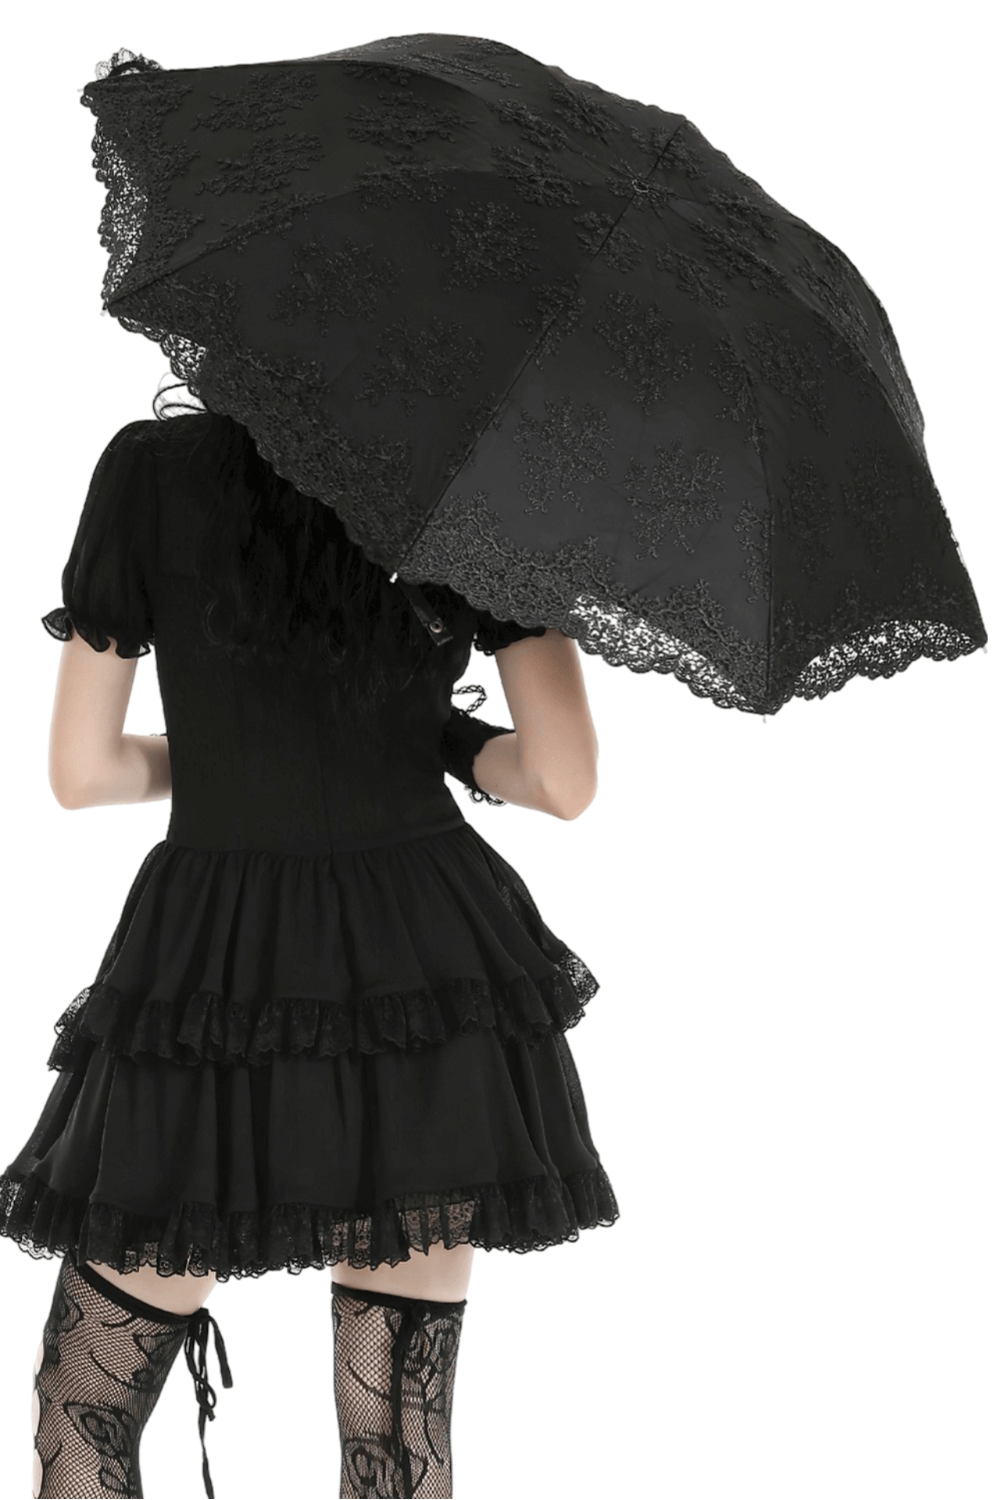 Vintage Lace Trim Gothic Umbrella with Wooden Handle